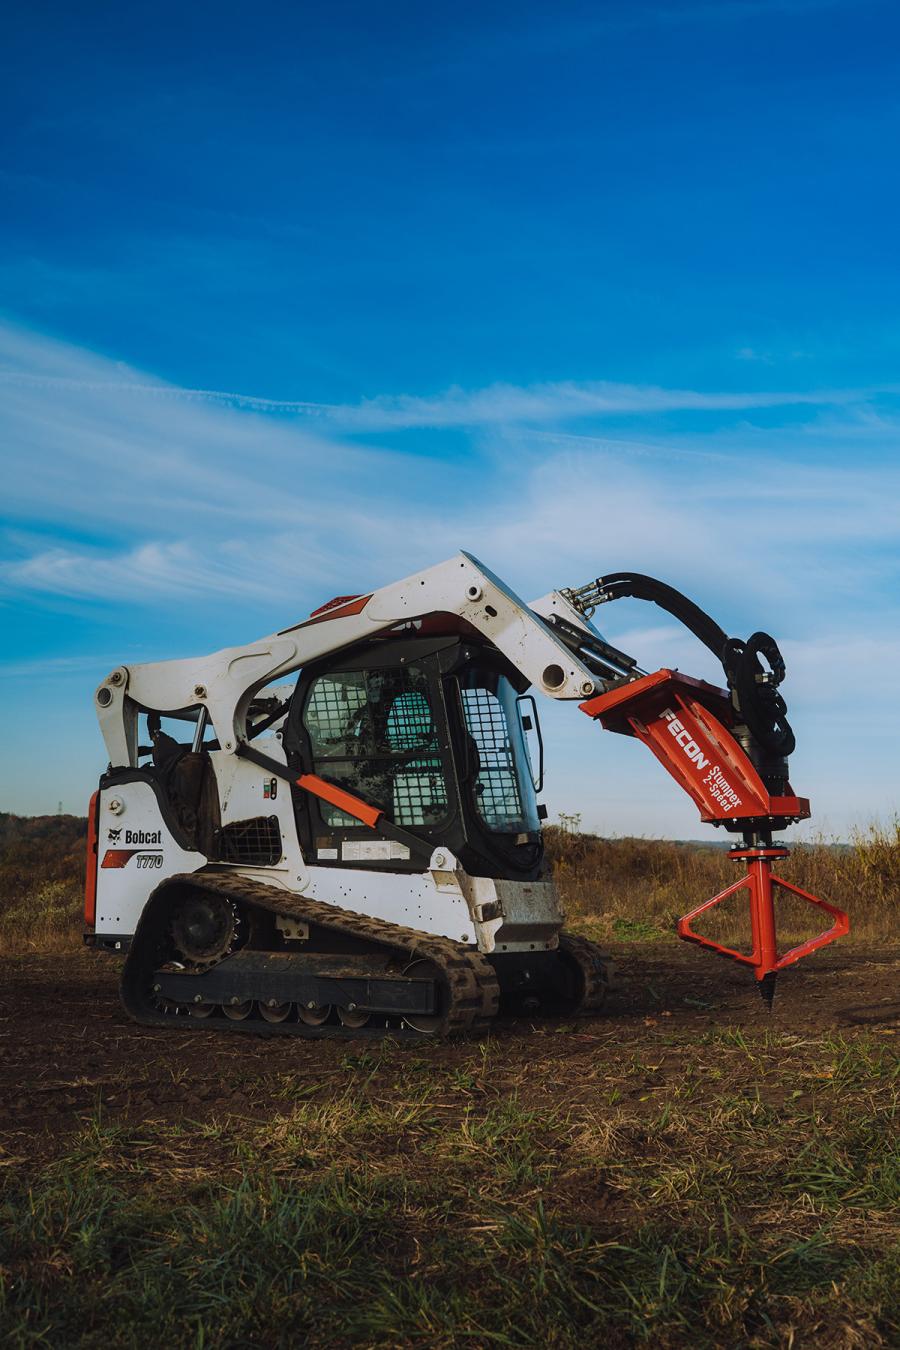 Designed to maximize 100 percent of machine output, the Stumpex 2-speed improves cut time by up to 50 percent, removing 24-in. stumps in less than 3 minutes, according to the manufacturer.